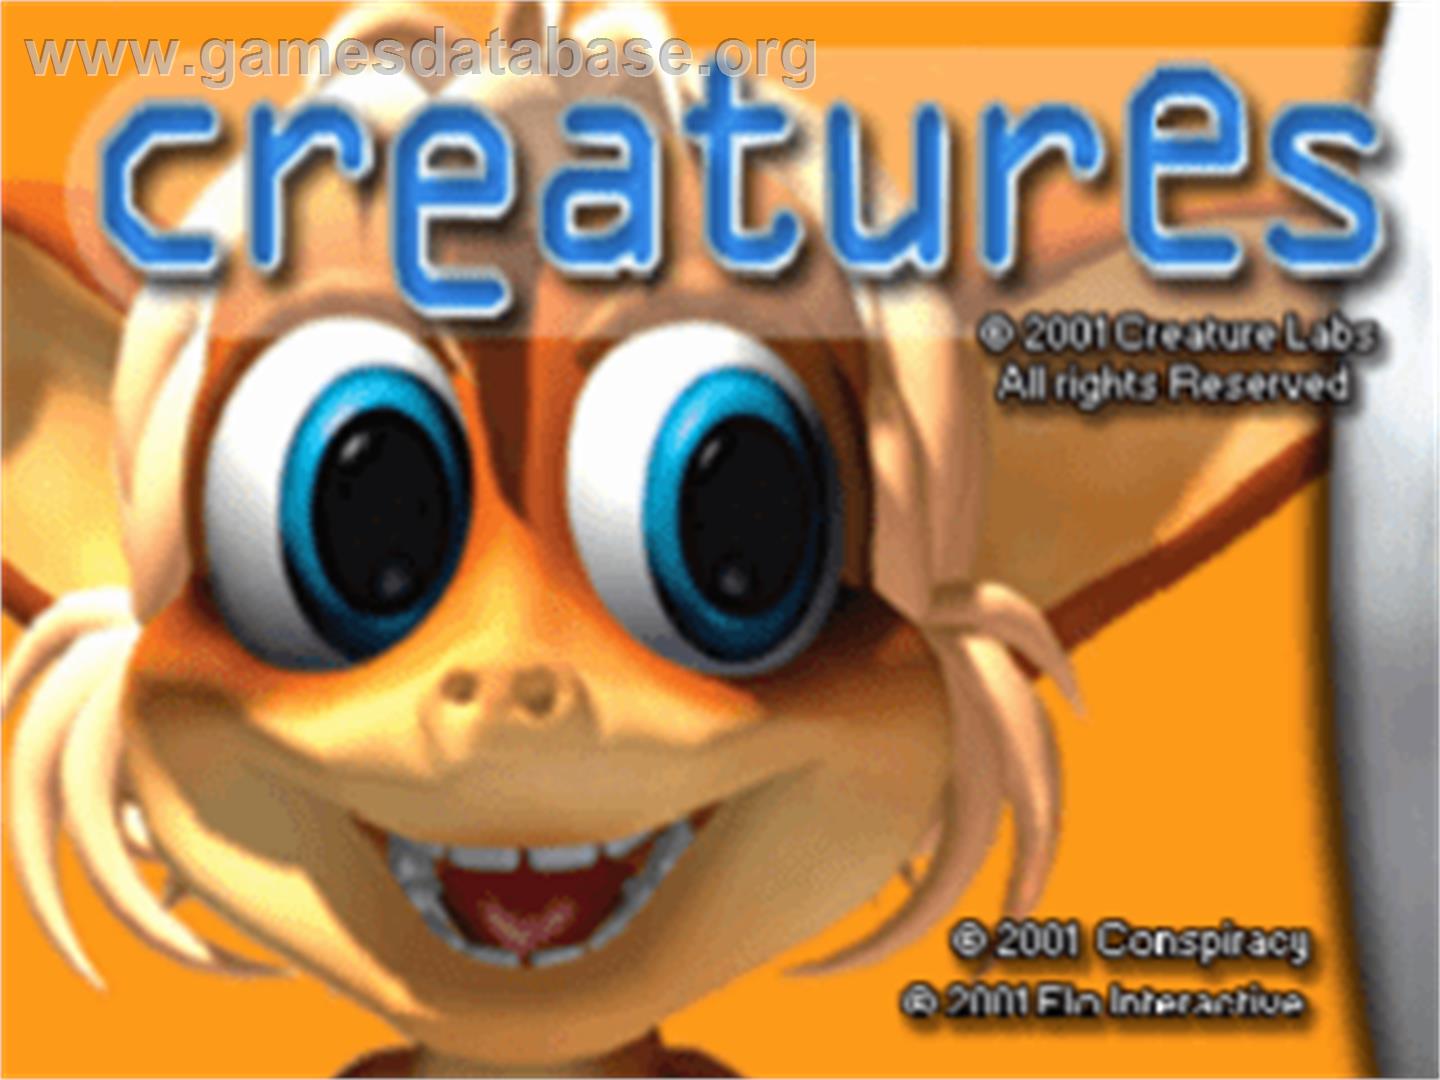 Creatures - Sony Playstation - Artwork - Title Screen